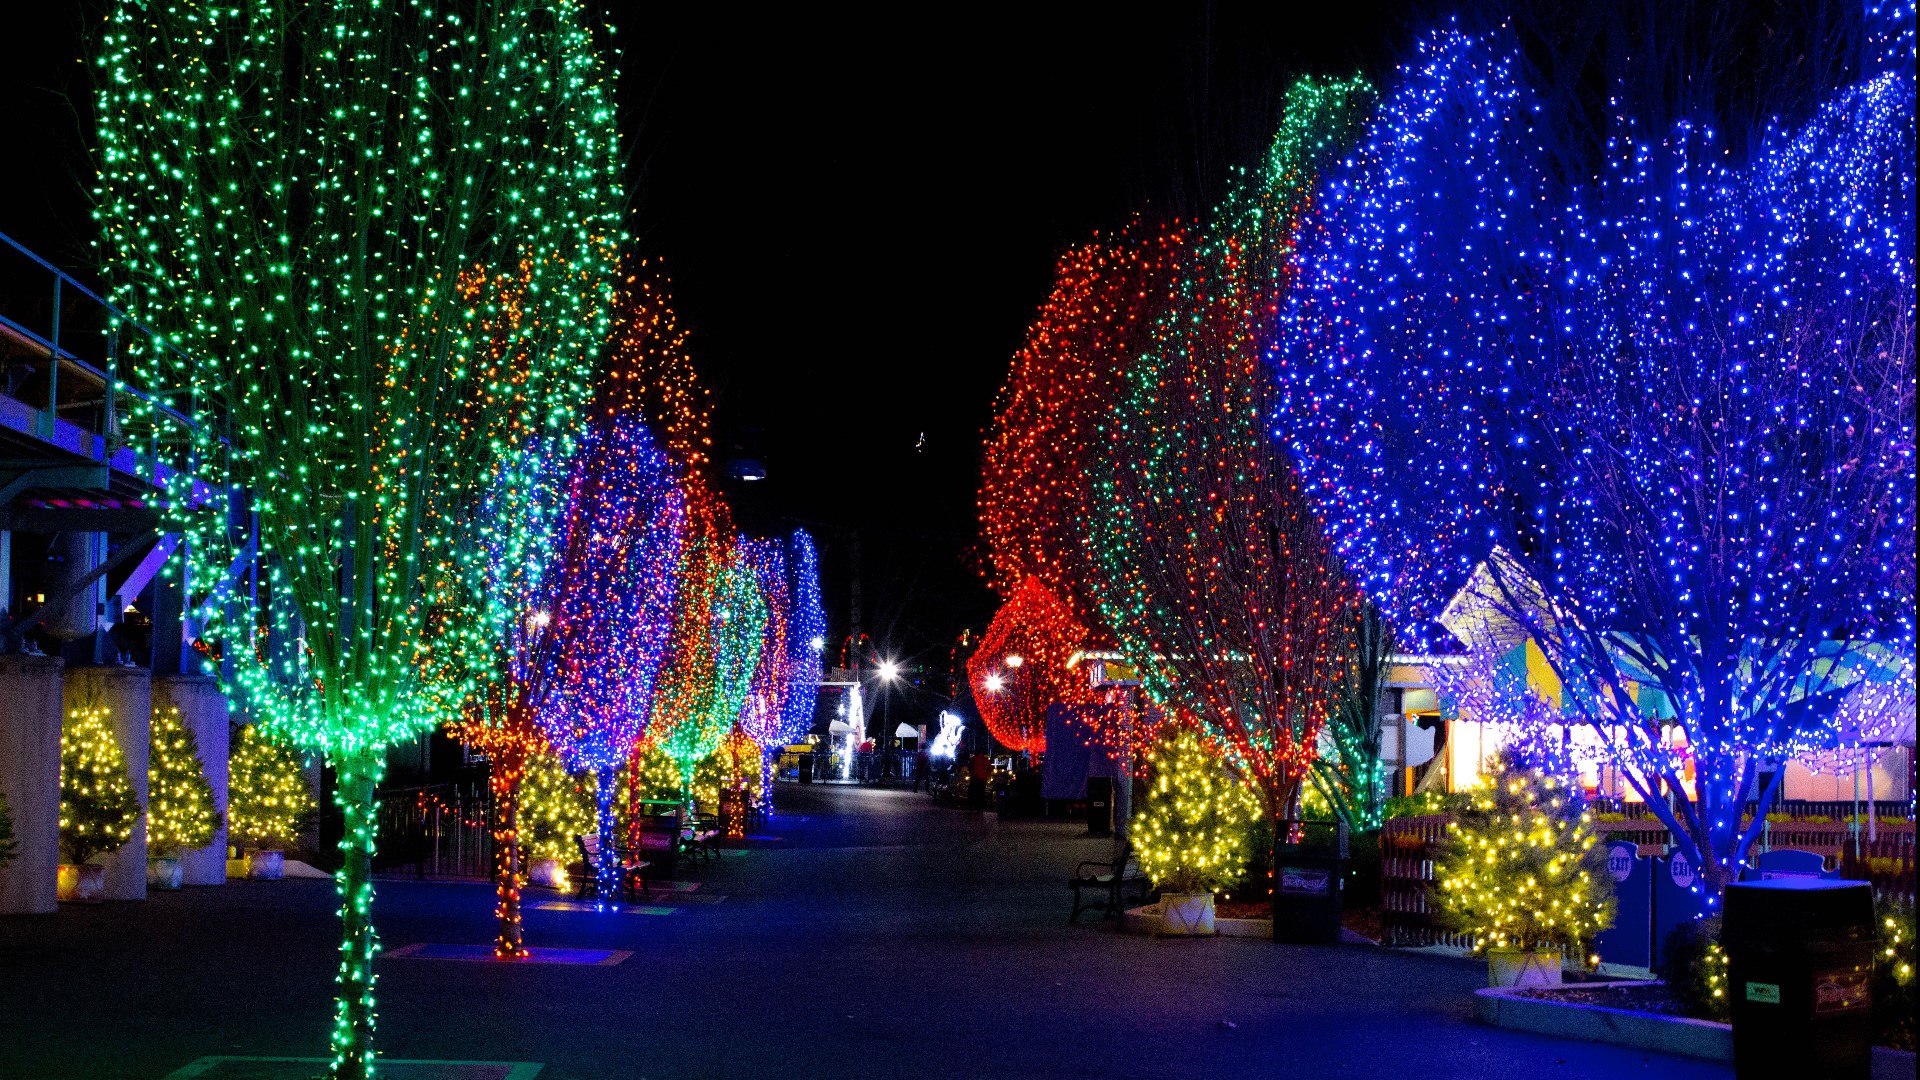 The holiday season in Pennsylvania is nothing short of spectacular. There are festive towns decked out with holiday decor and events the whole family can enjoy.